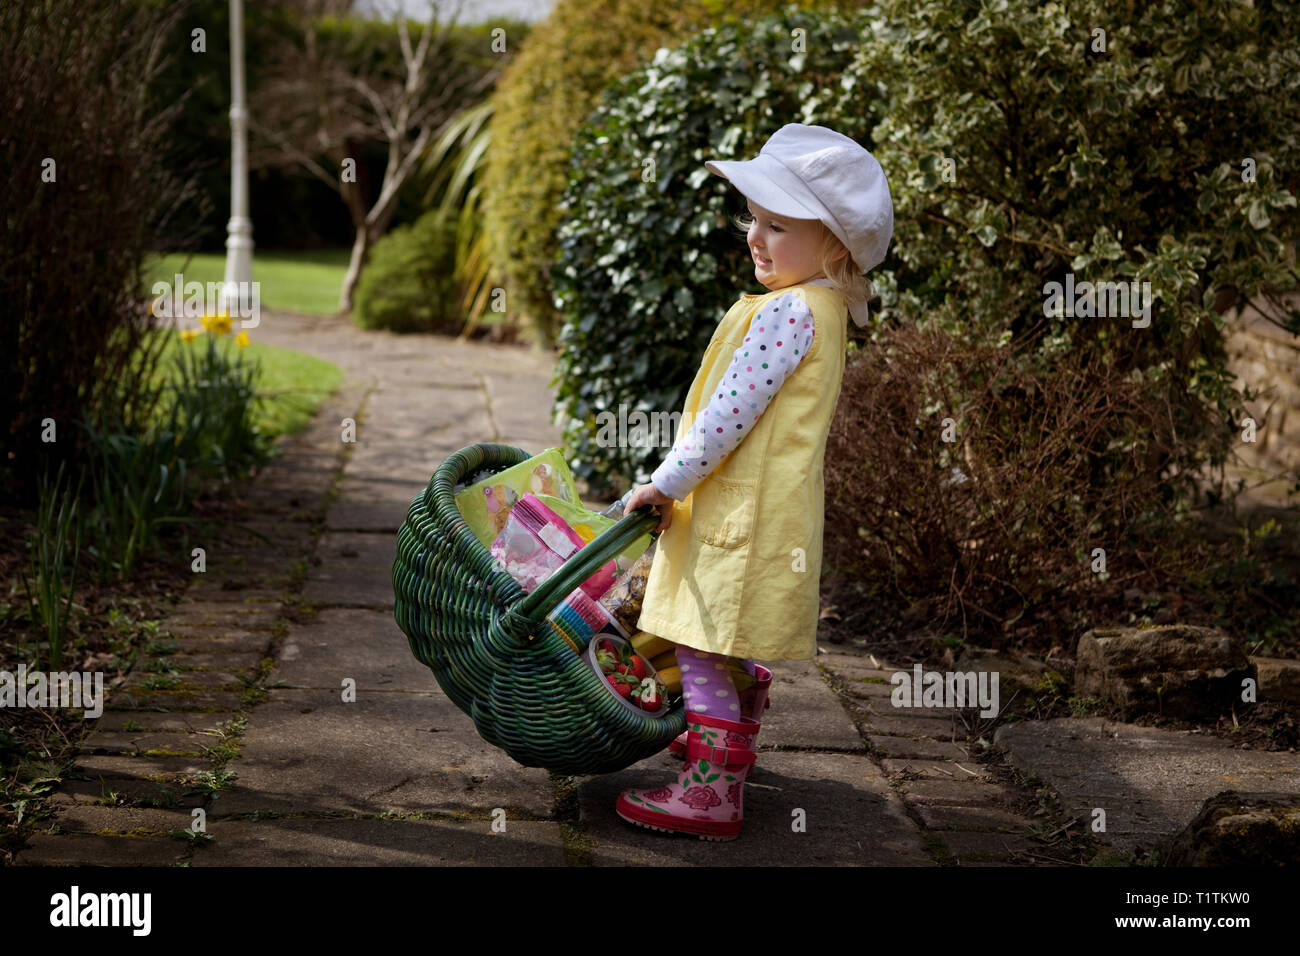 Toddler carrying a green wicker basket full of groceries Stock Photo